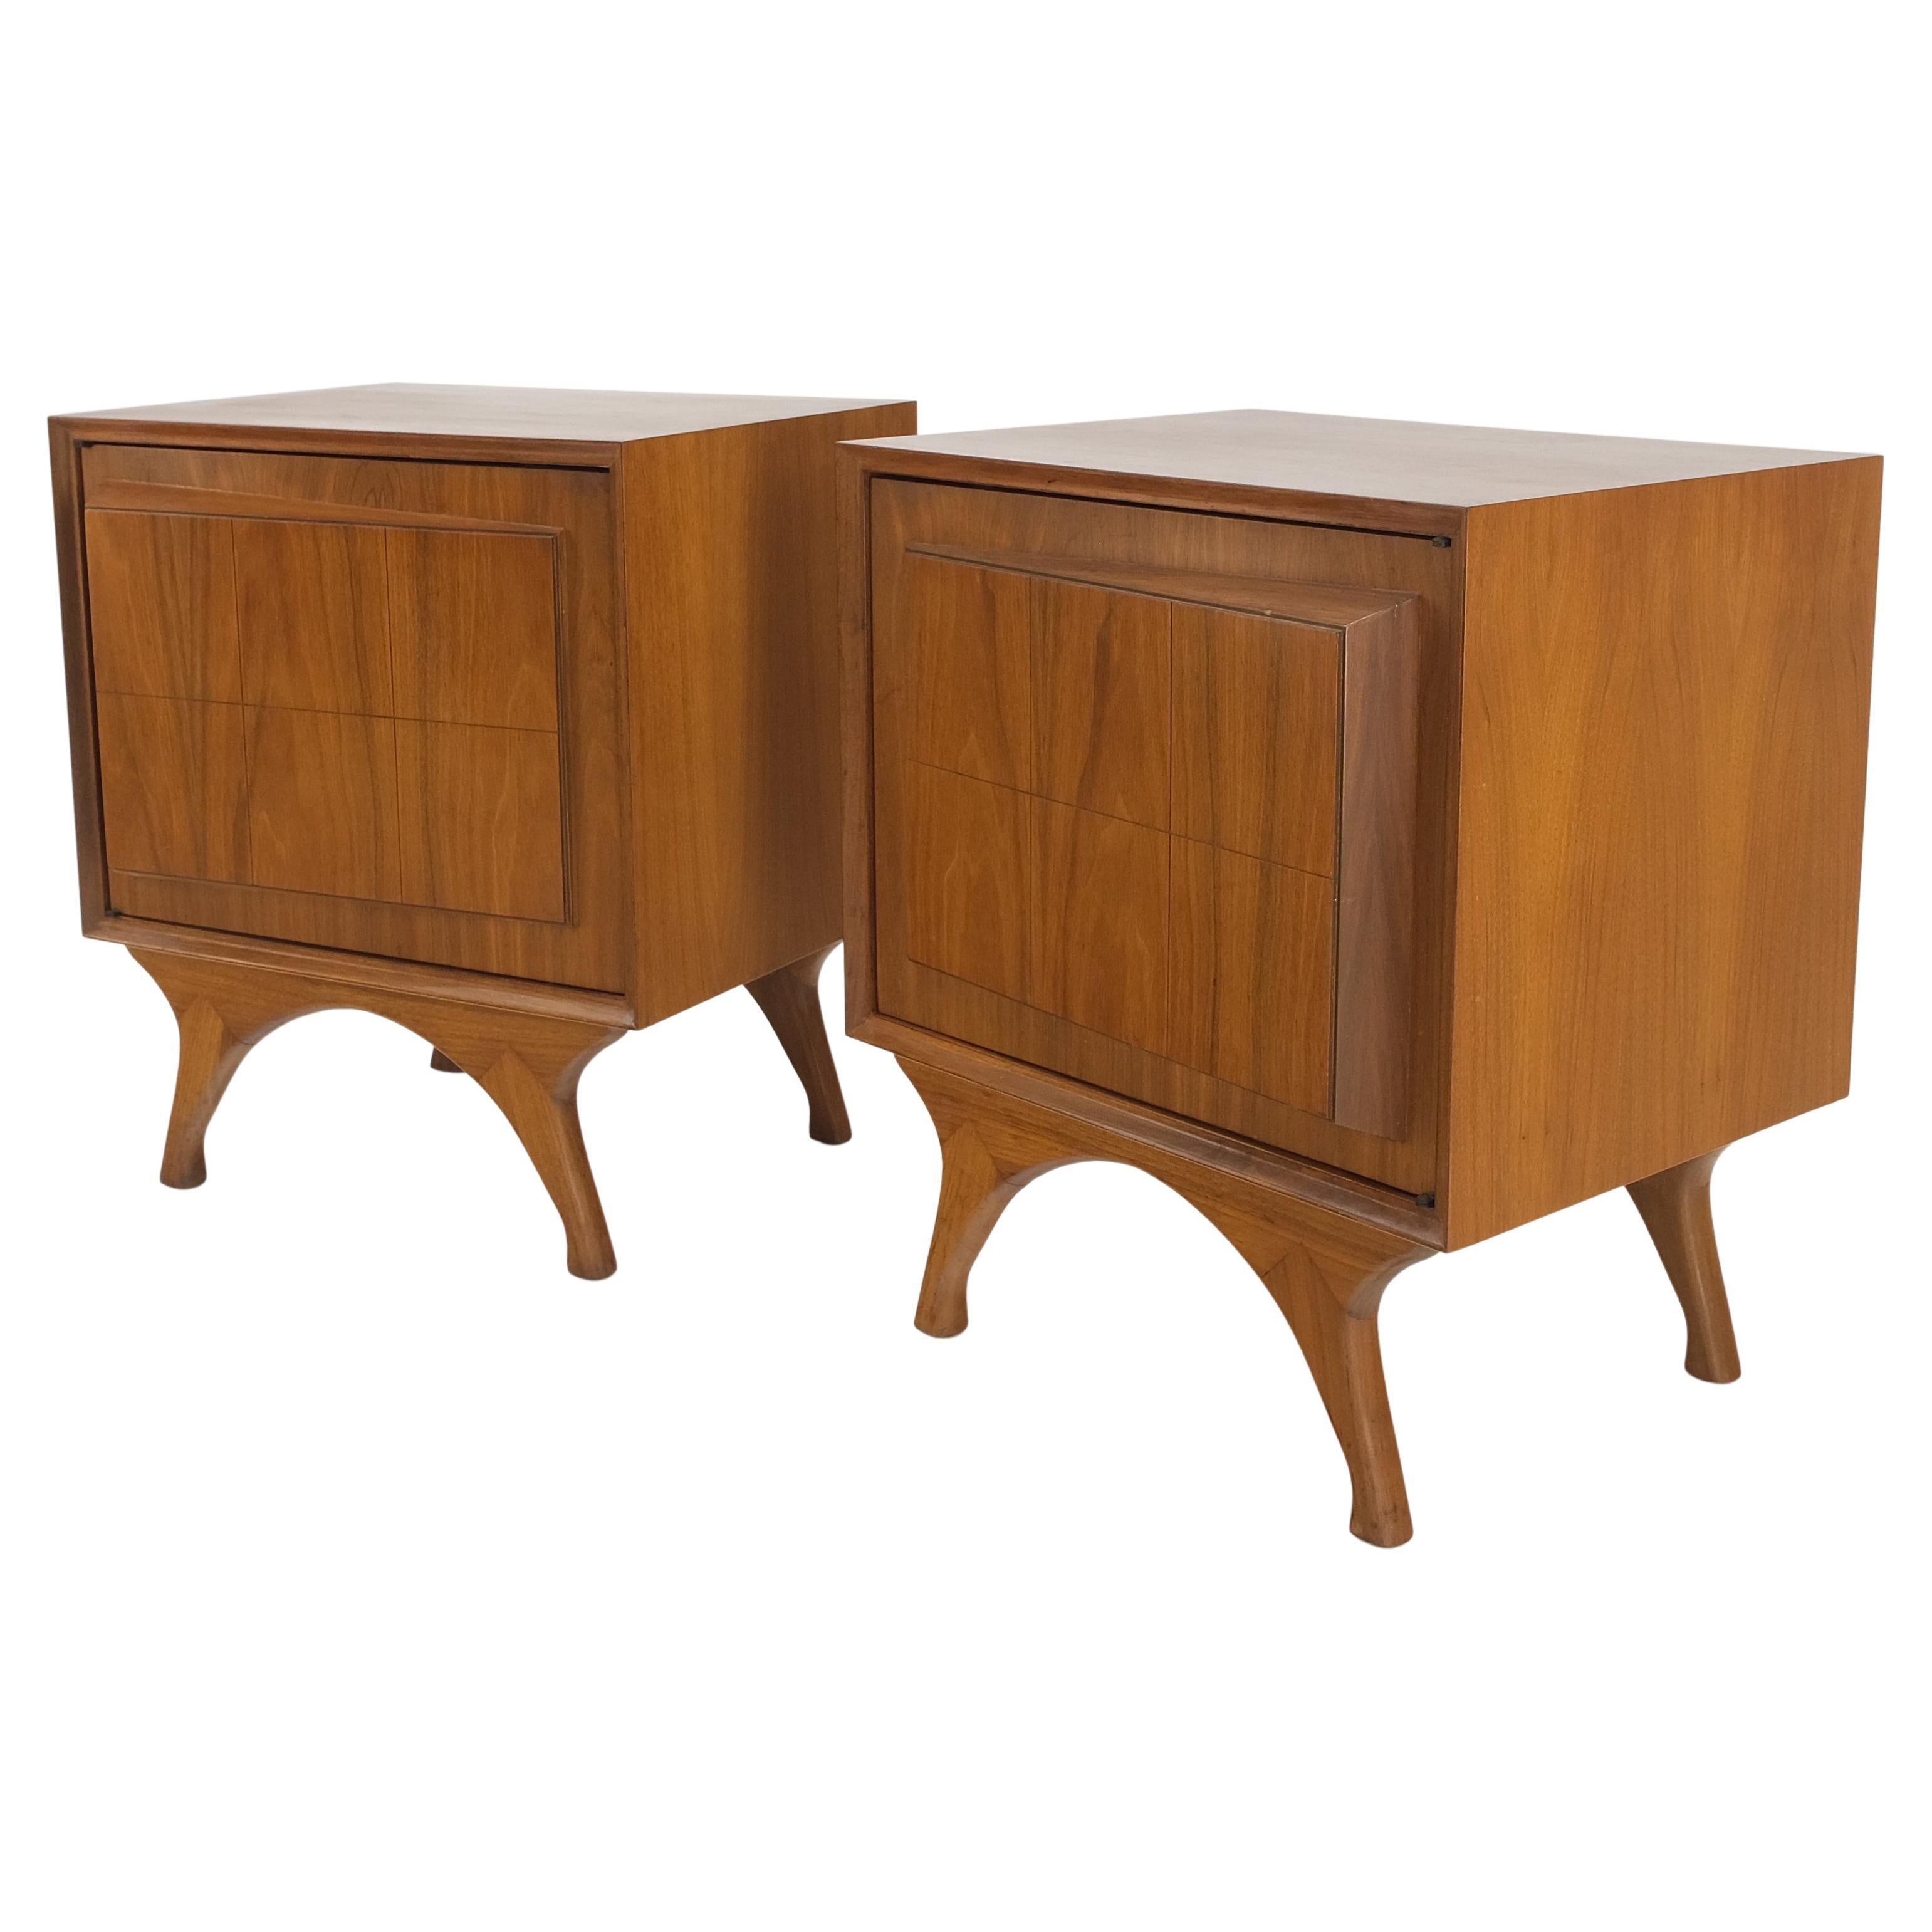 Pair of Sculpted Fronts Legs Walnut Mid-Century Modern nightstands end tables MINT! Kagan Pearsall Decor..